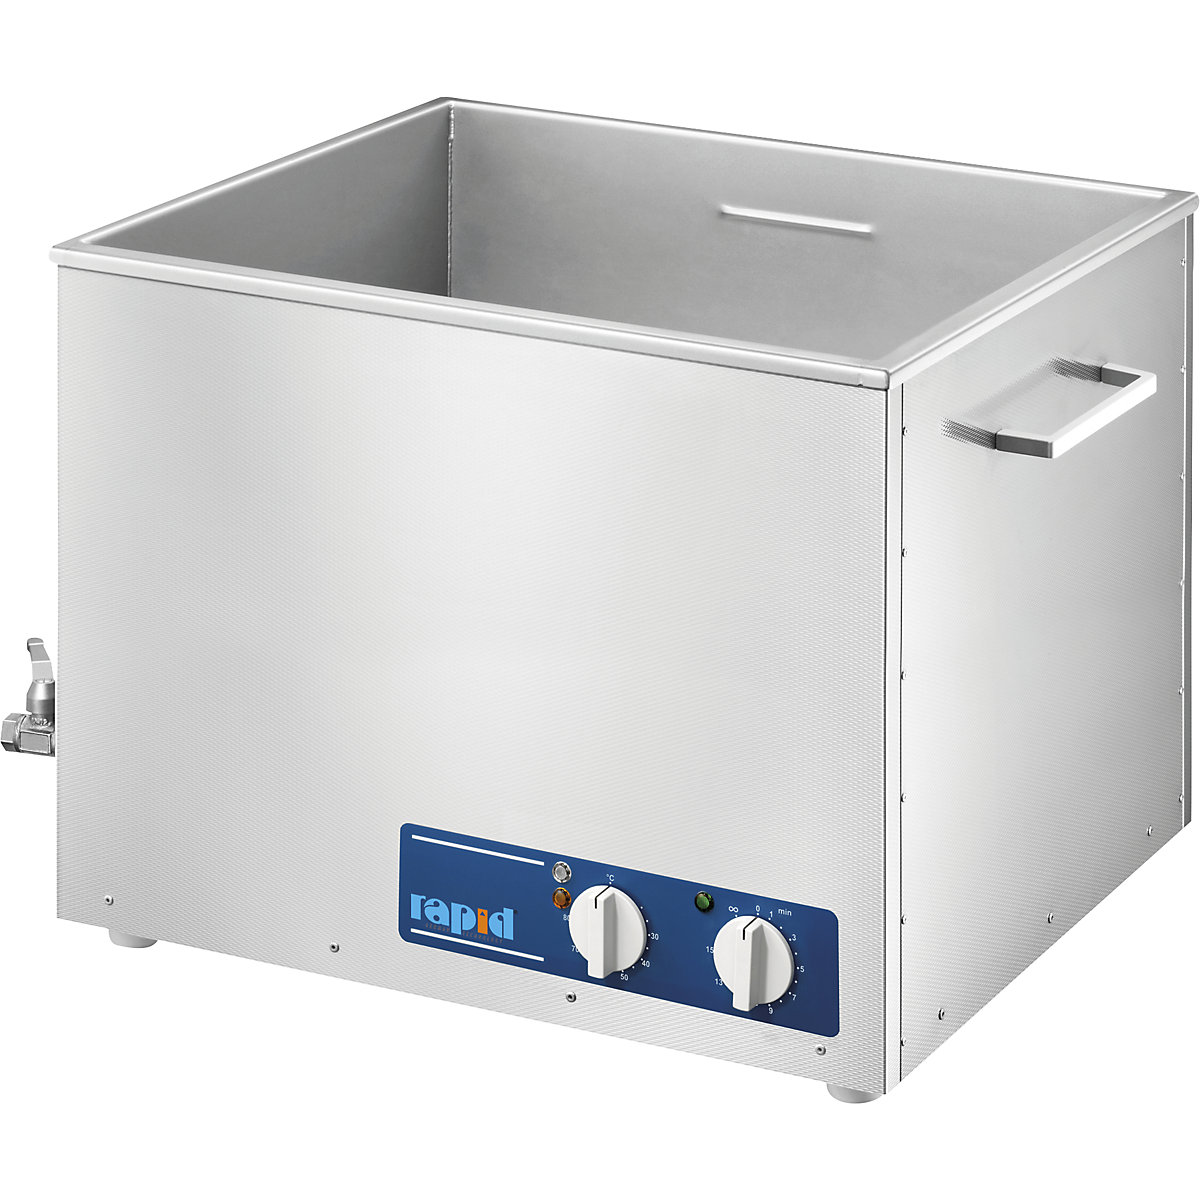 Ultrasonic cleaner with stainless steel cleaning trough